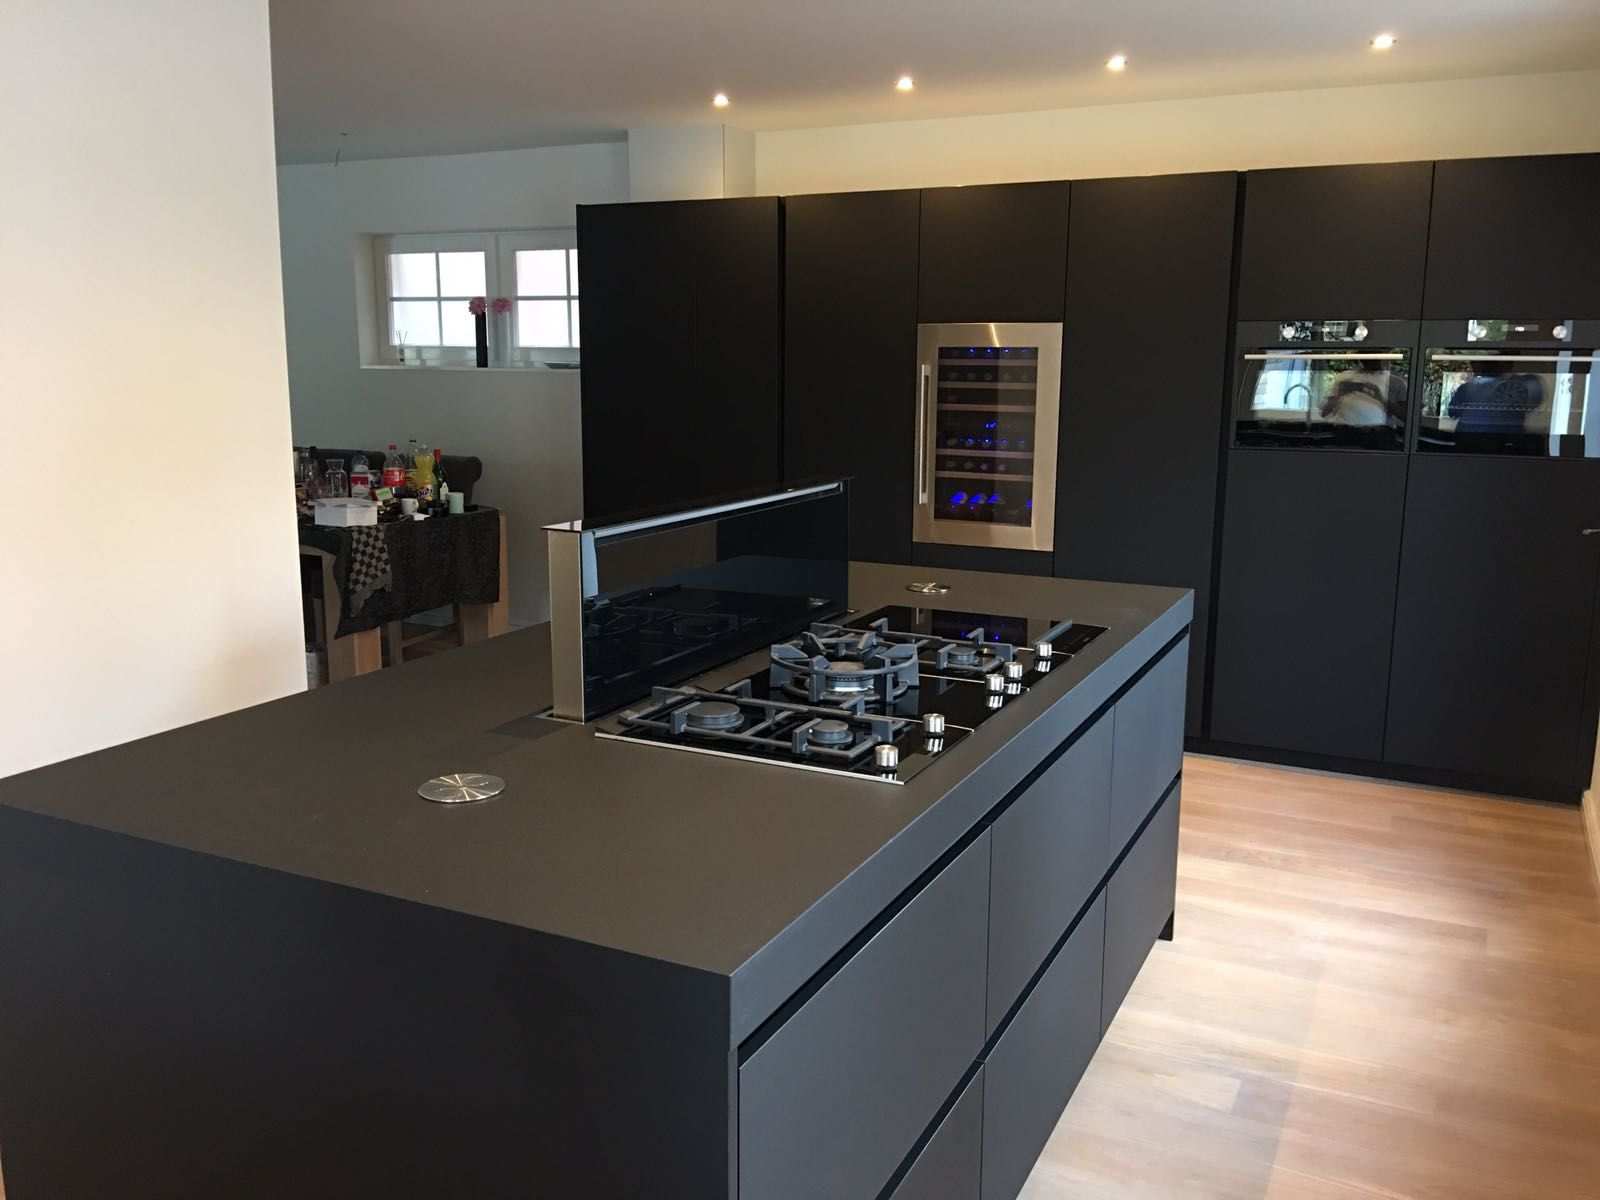 Modern Kitchen With High Gloss Black Cabinets And Wood Butcher